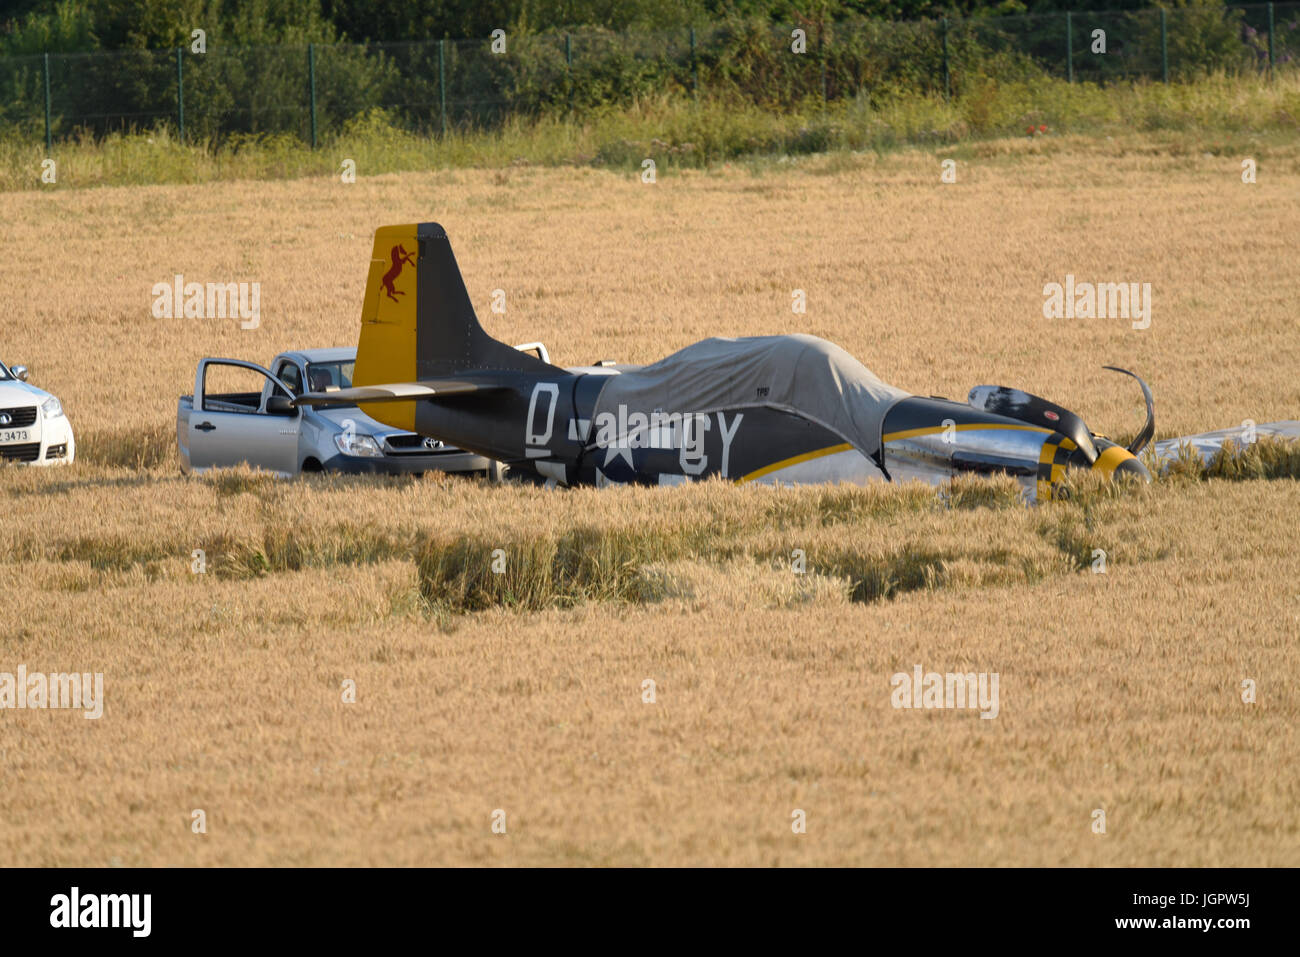 The pilot of a wartime North American P-51 Mustang fighter plane named 'Miss Velma' made a successful forced landing into a field after suffering engine failure upon completion of a display at an airshow Stock Photo